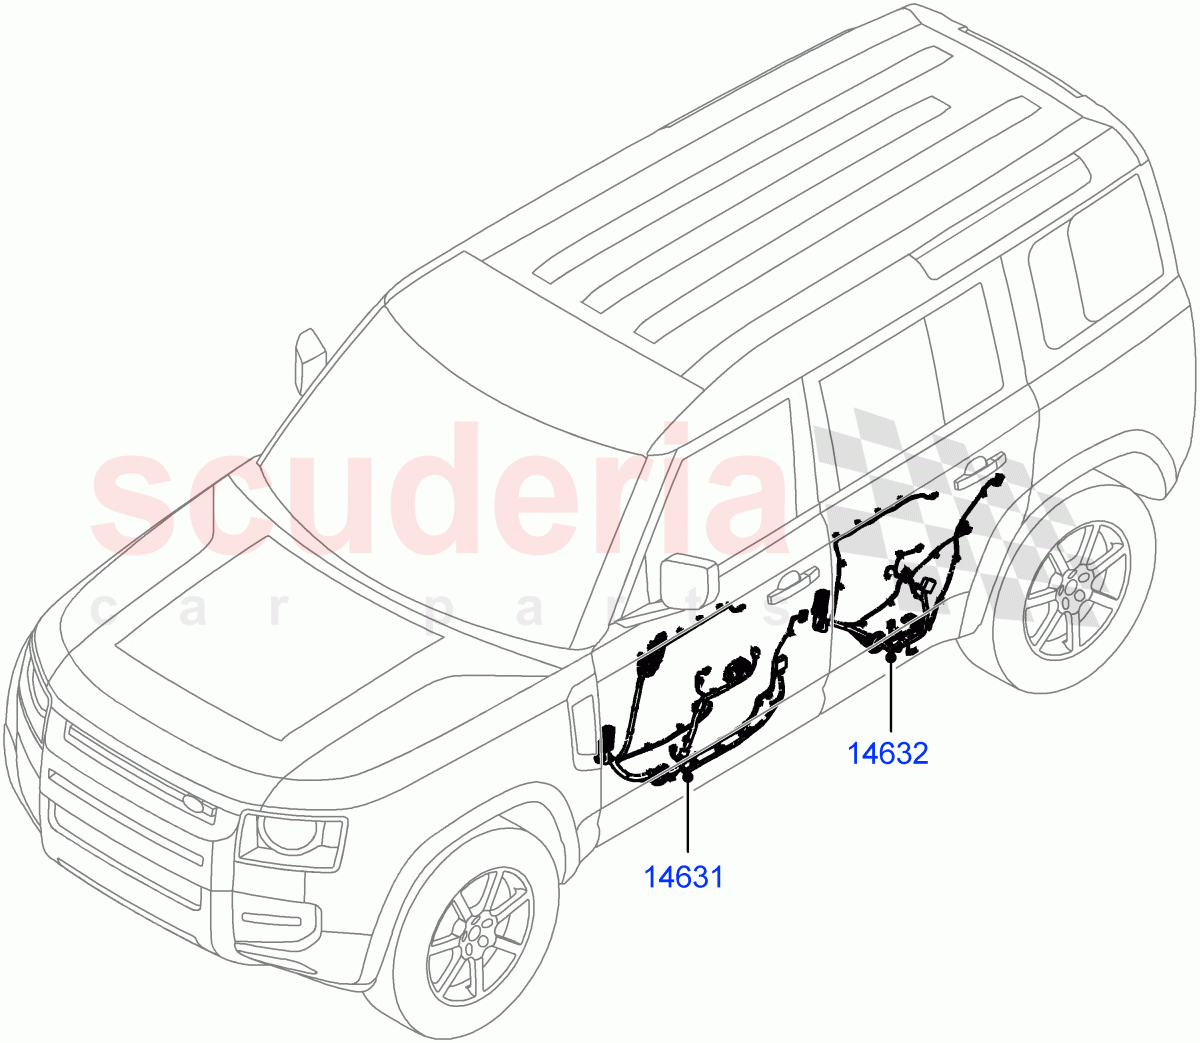 Wiring - Body Closures(Front And Rear Doors)(5 Door,Standard Wheelbase) of Land Rover Land Rover Defender (2020+) [5.0 OHC SGDI SC V8 Petrol]